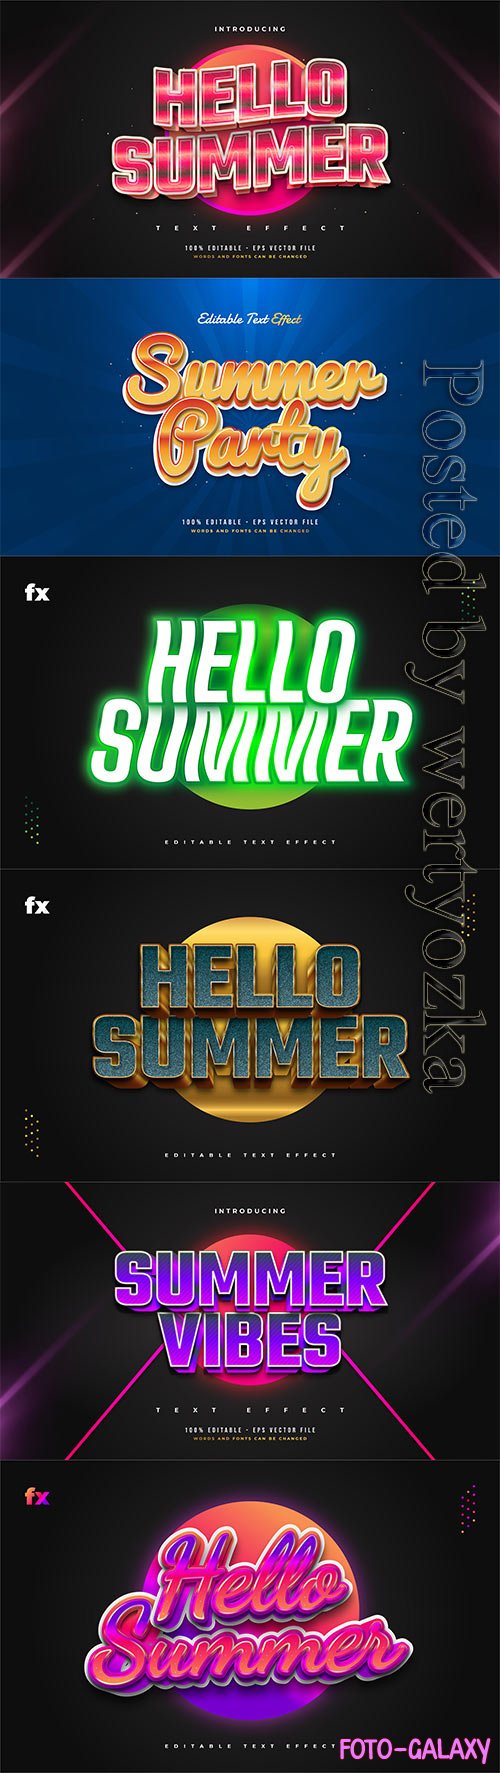 Hello summer 3d editable text style effect in vector vol 4